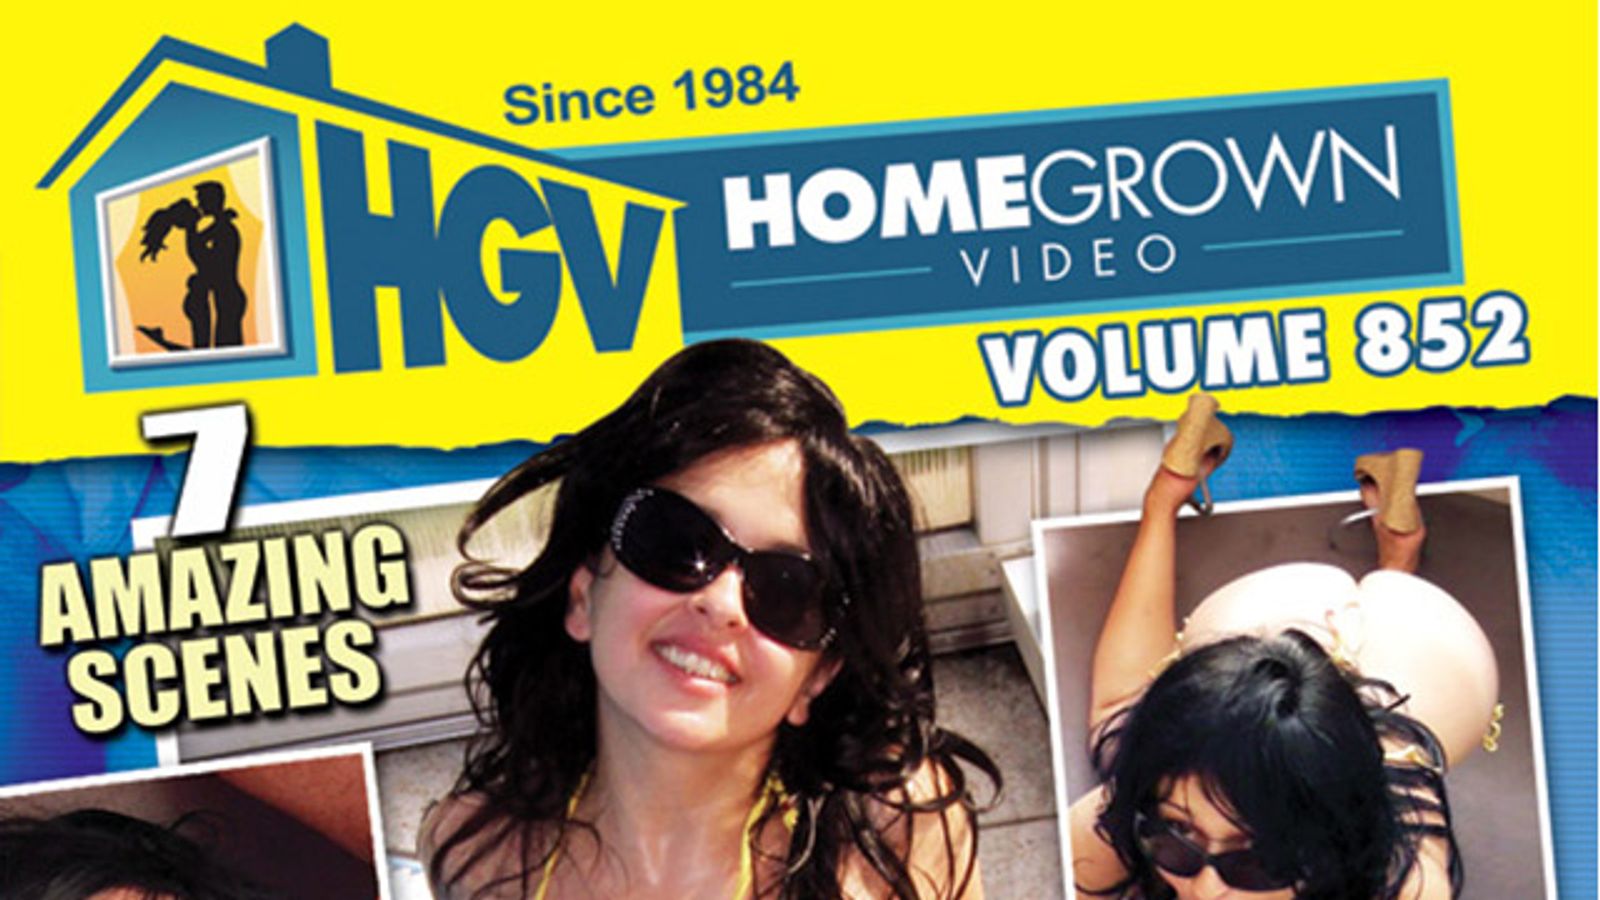 ‘Homegrown Video 852’ Out Now in Longest-Running Amateur Series